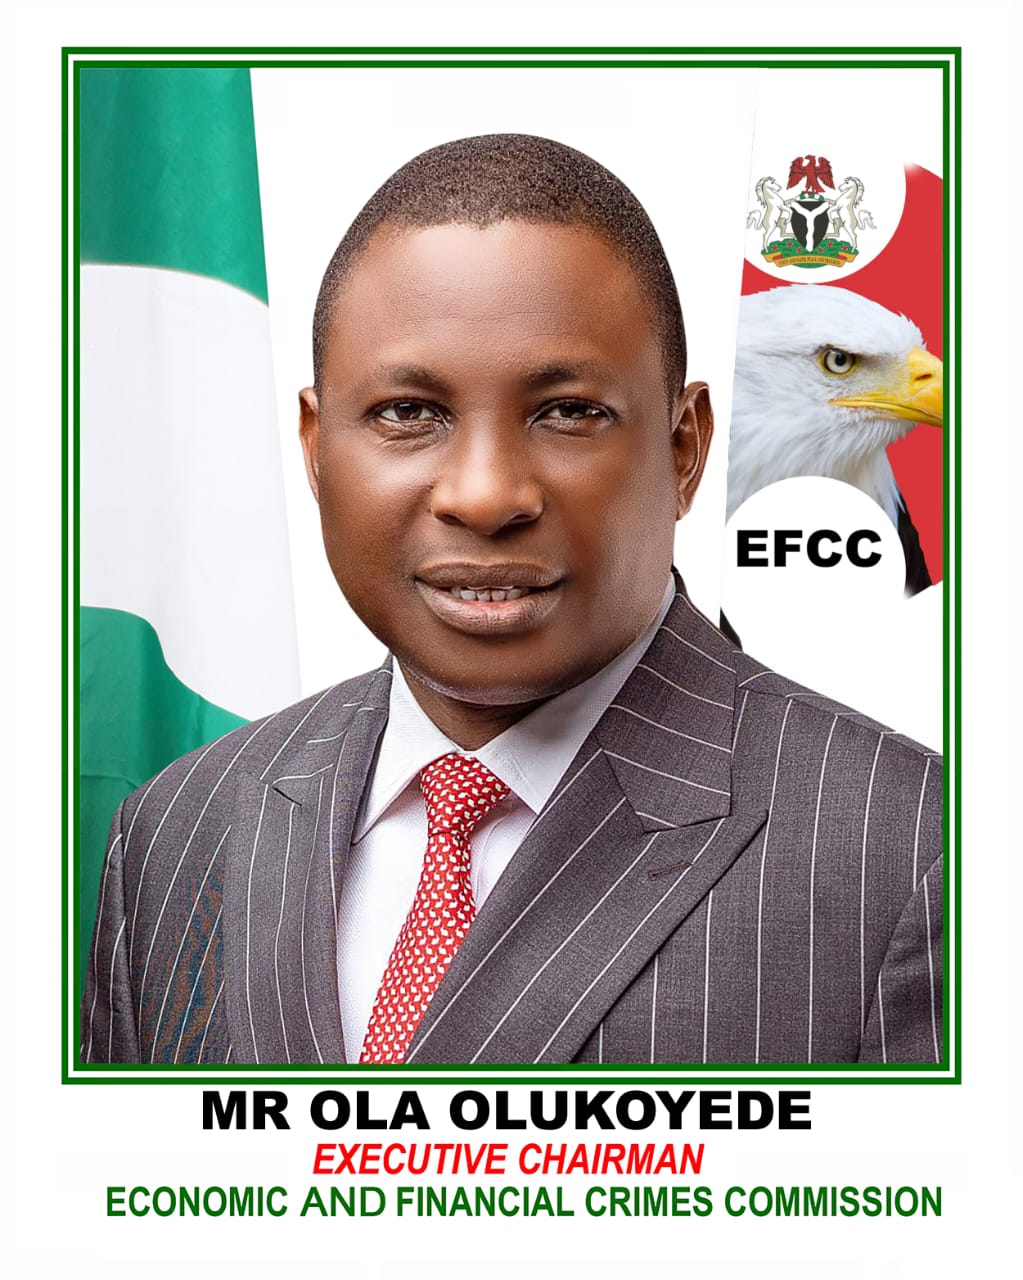 New EFCC Chair Olukoyede orders group to scream property